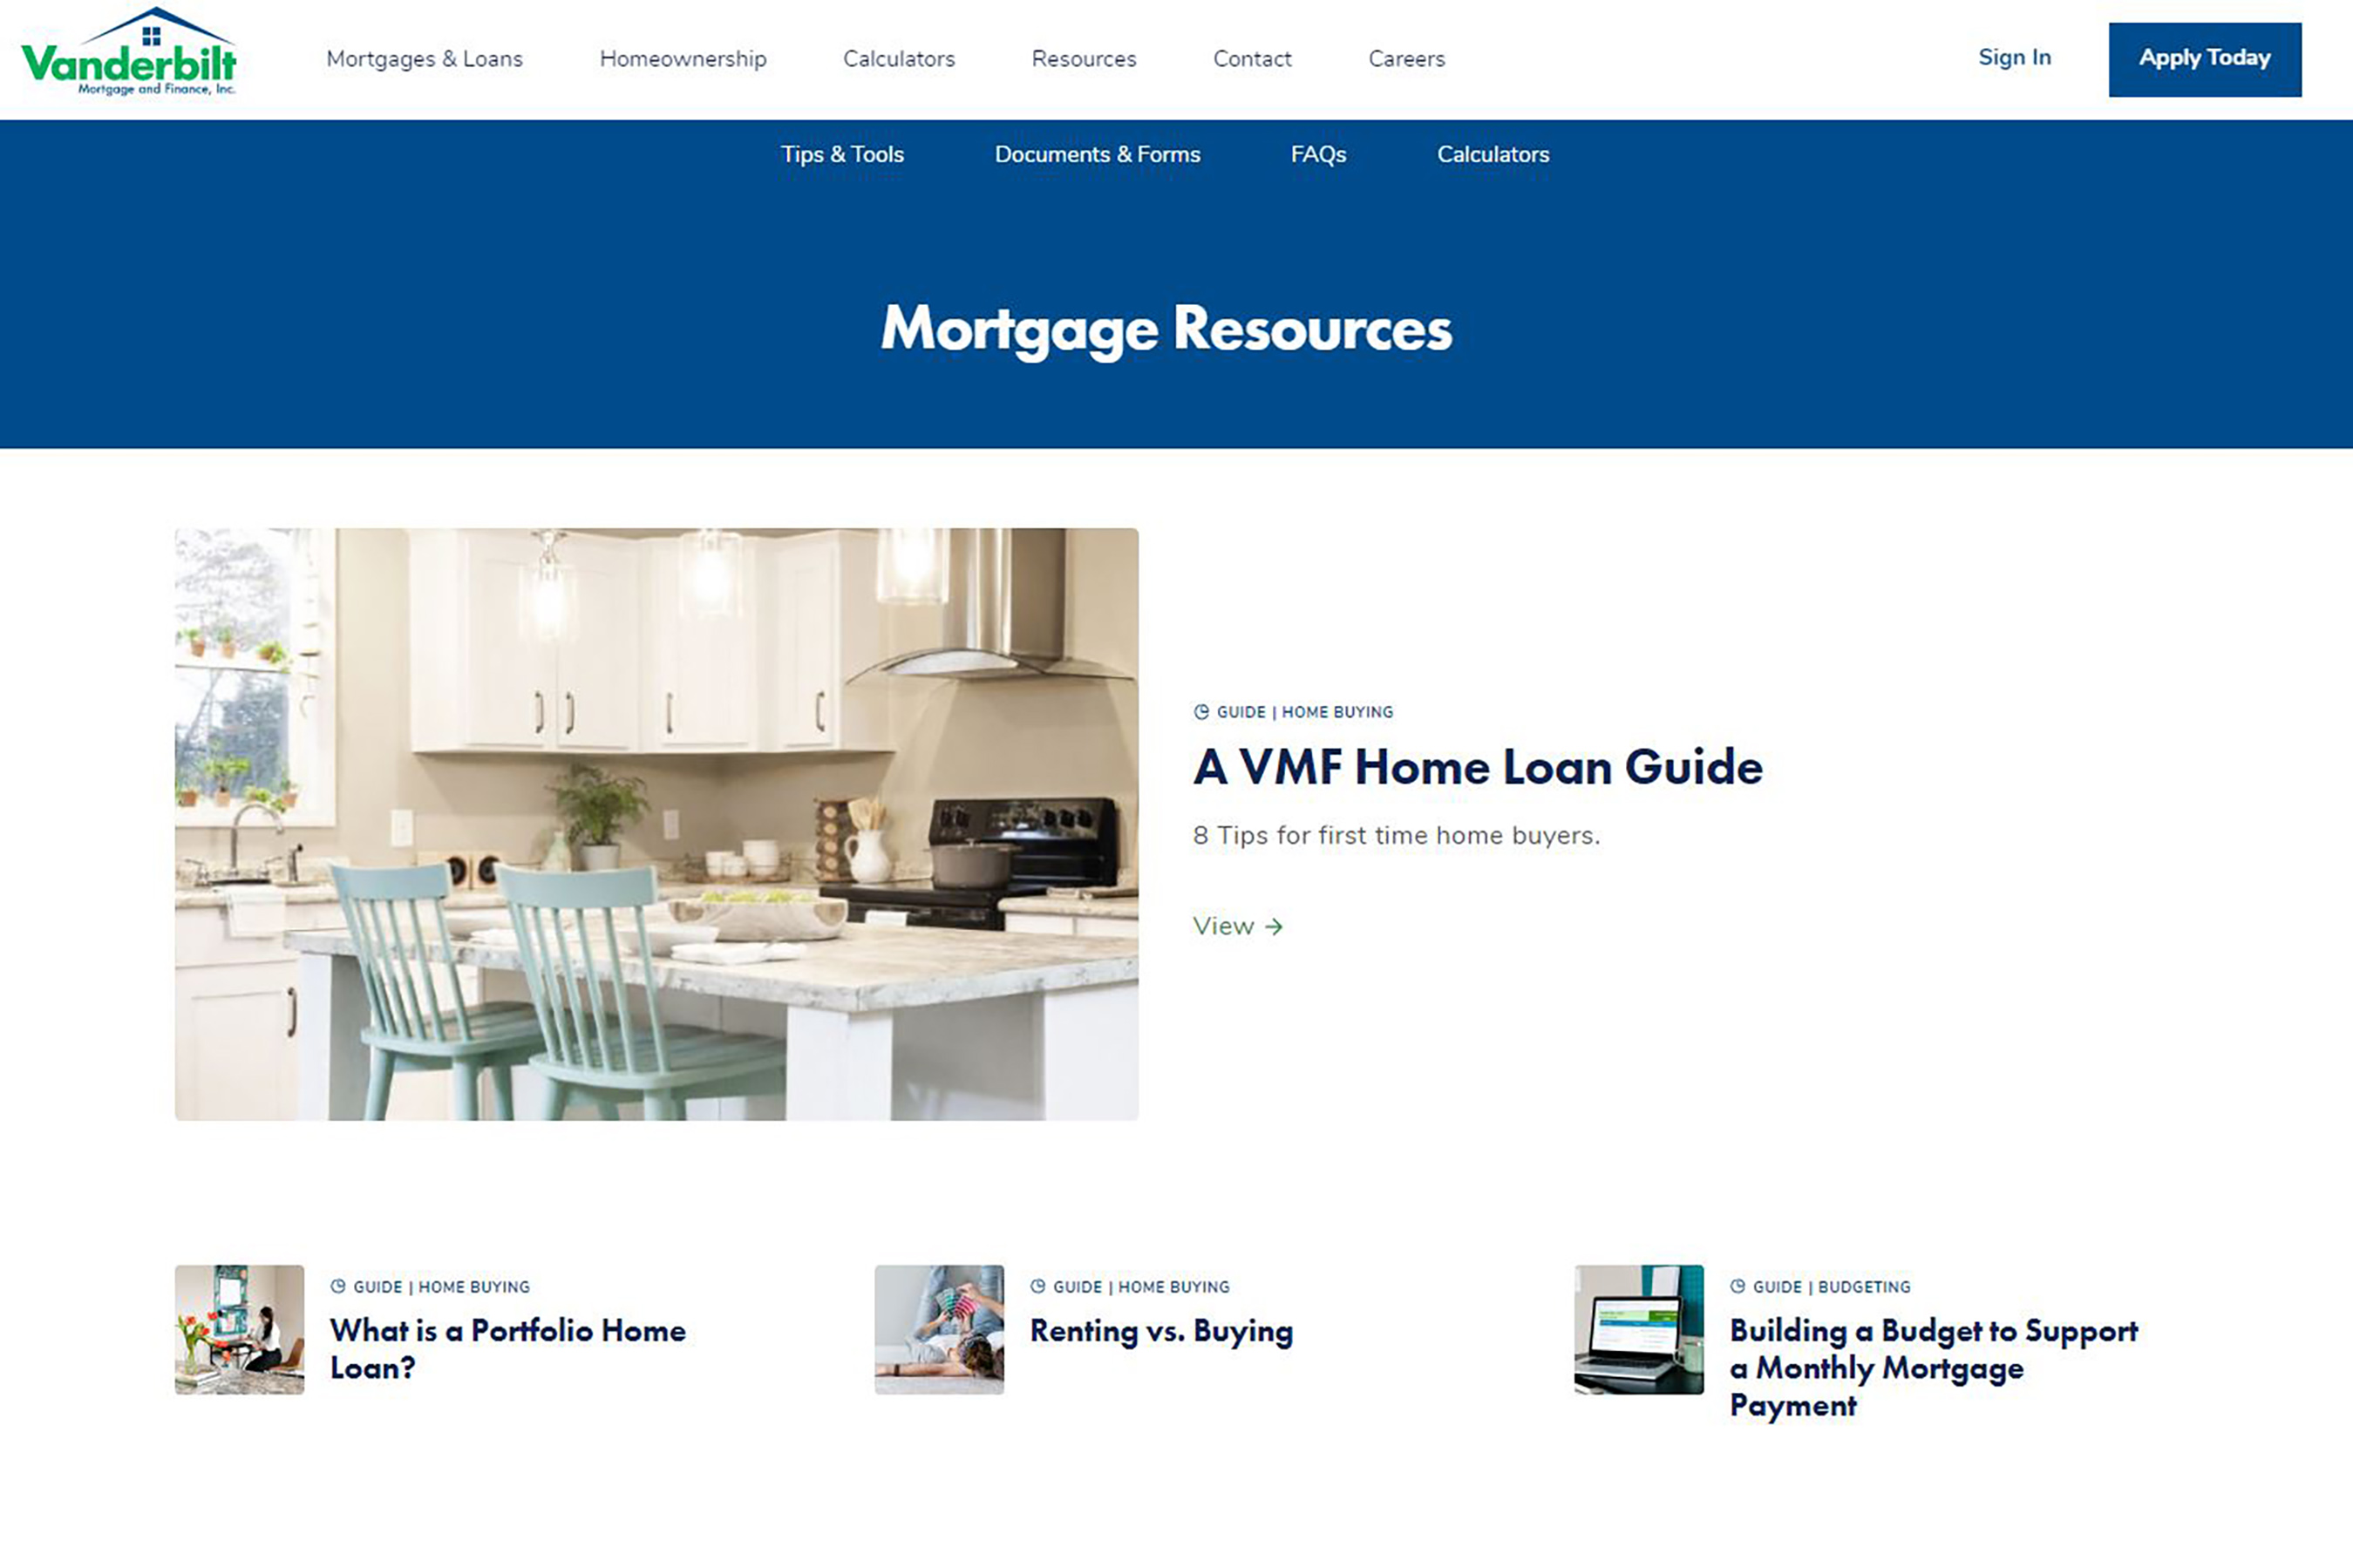 Mortgage Resources webpage